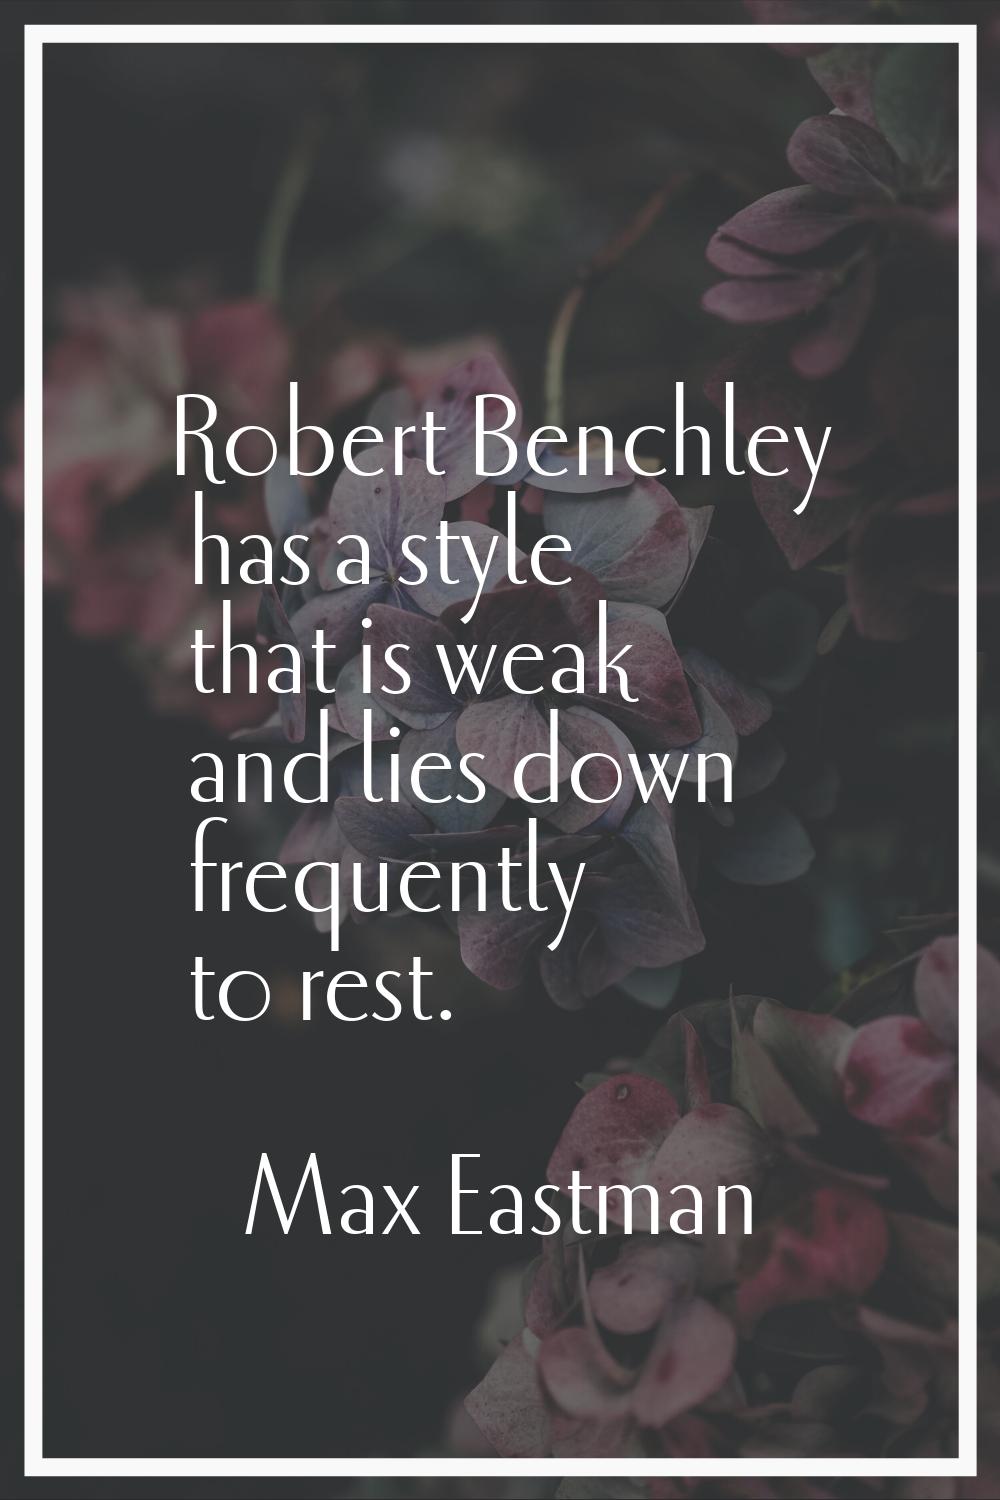 Robert Benchley has a style that is weak and lies down frequently to rest.